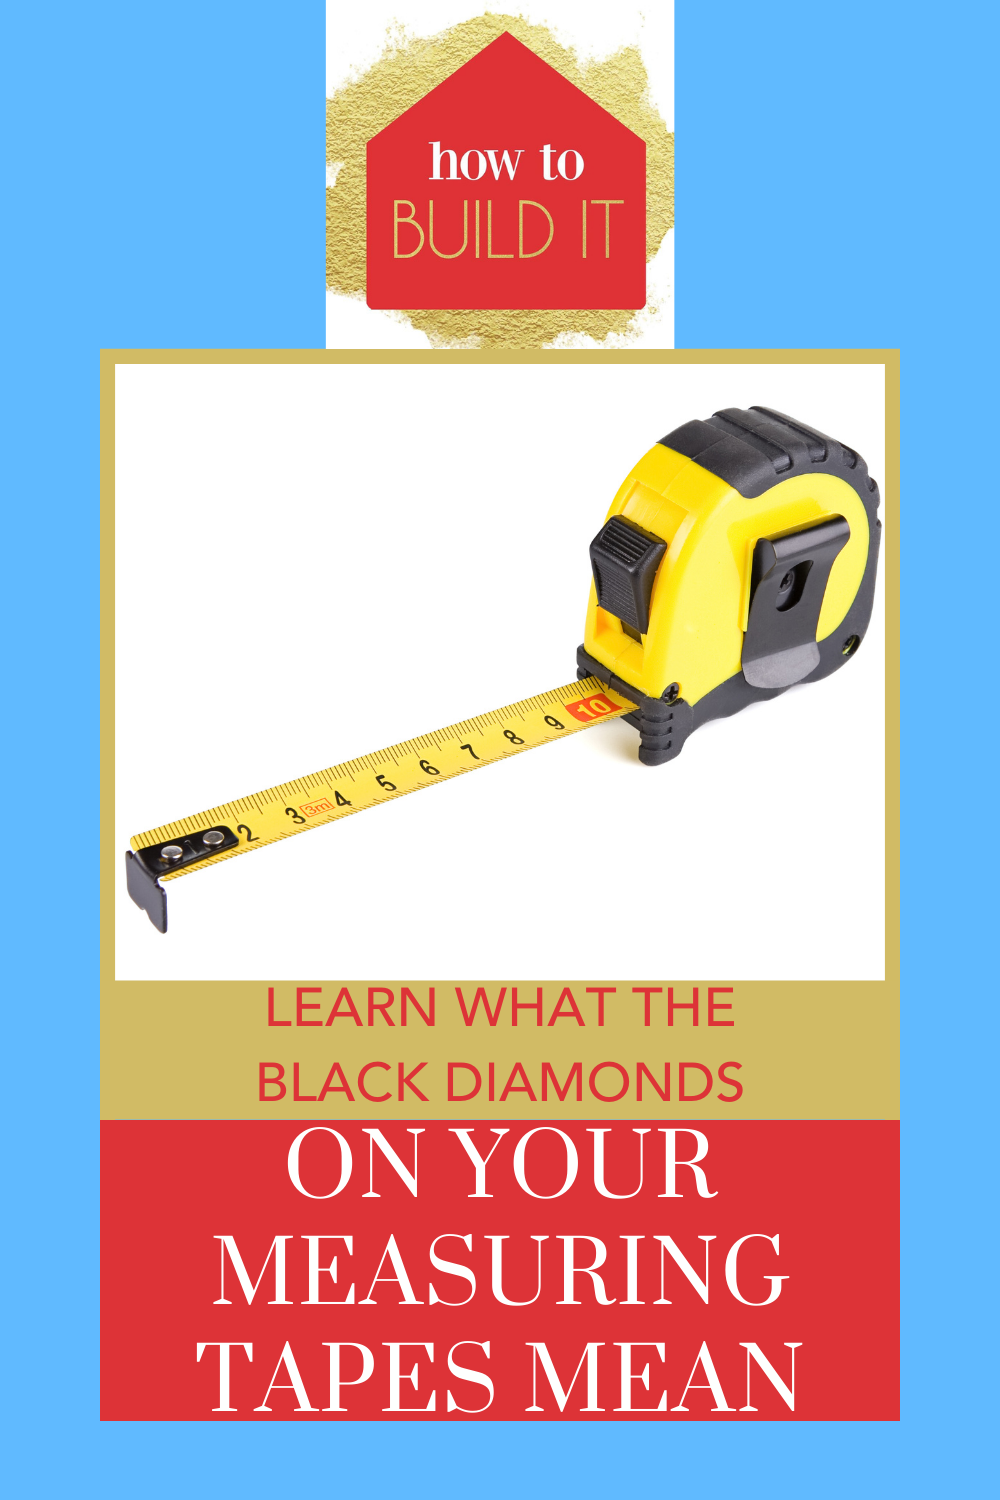 Howtobuildit.org is the ultimate resource for home improvement and DIY projects! Learn how to operate all of your building equipment! Start easy with this guide to measuring tapes and what the black diamonds indicate.